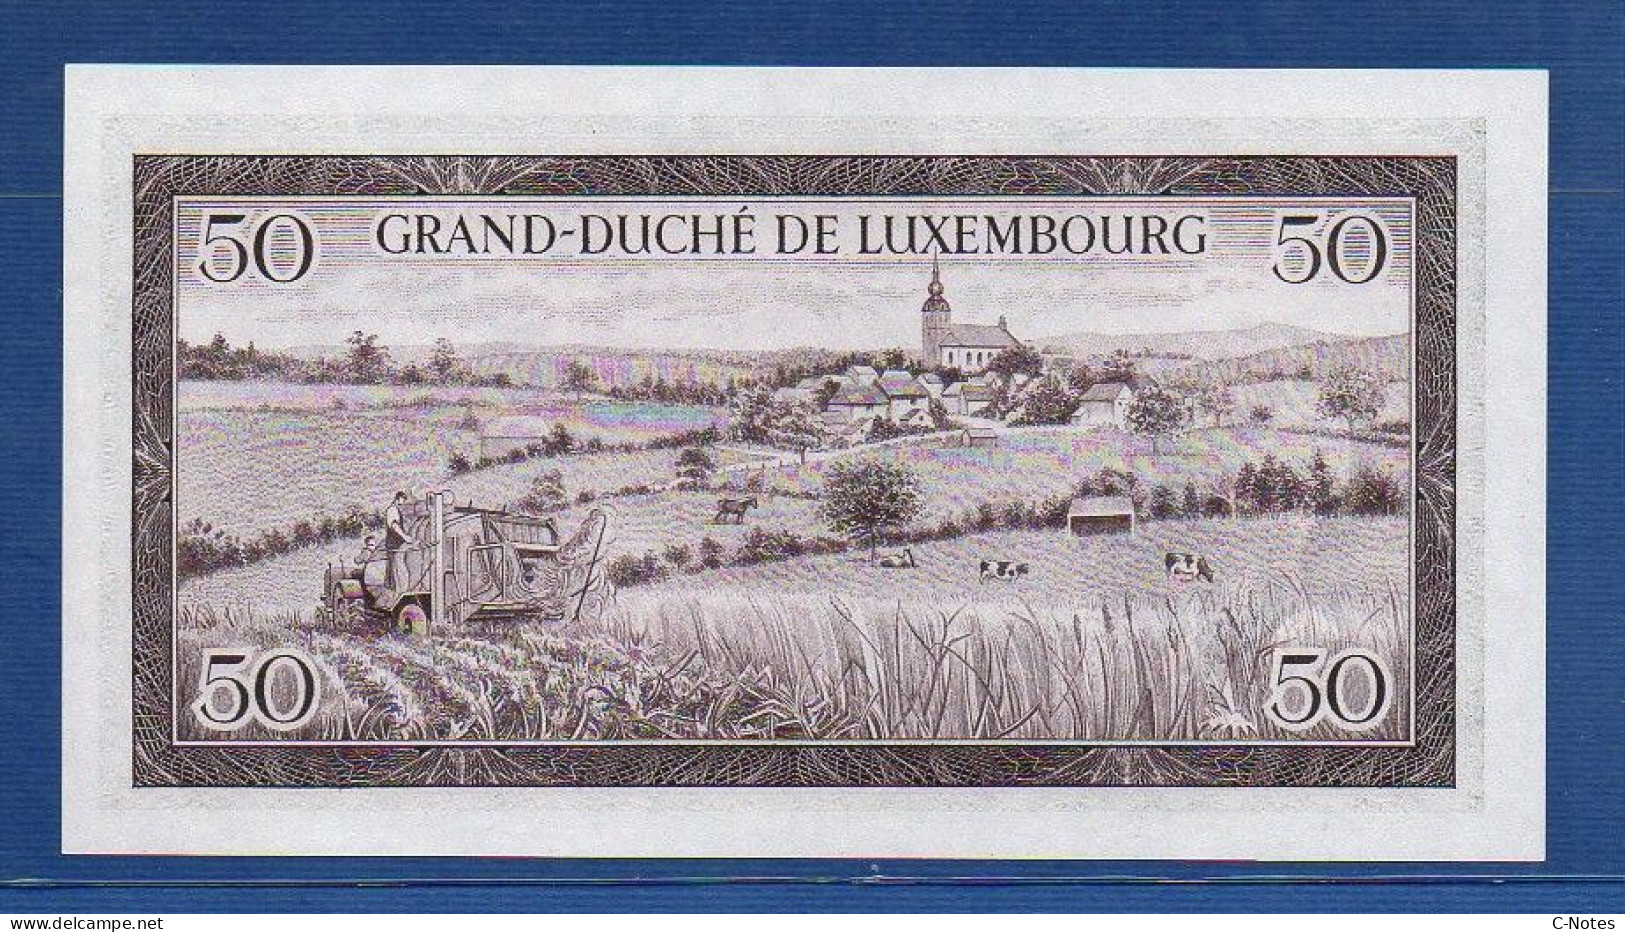 LUXEMBOURG - P.51 – 50 Francs 1961 UNC, S/n C978578 - Luxembourg